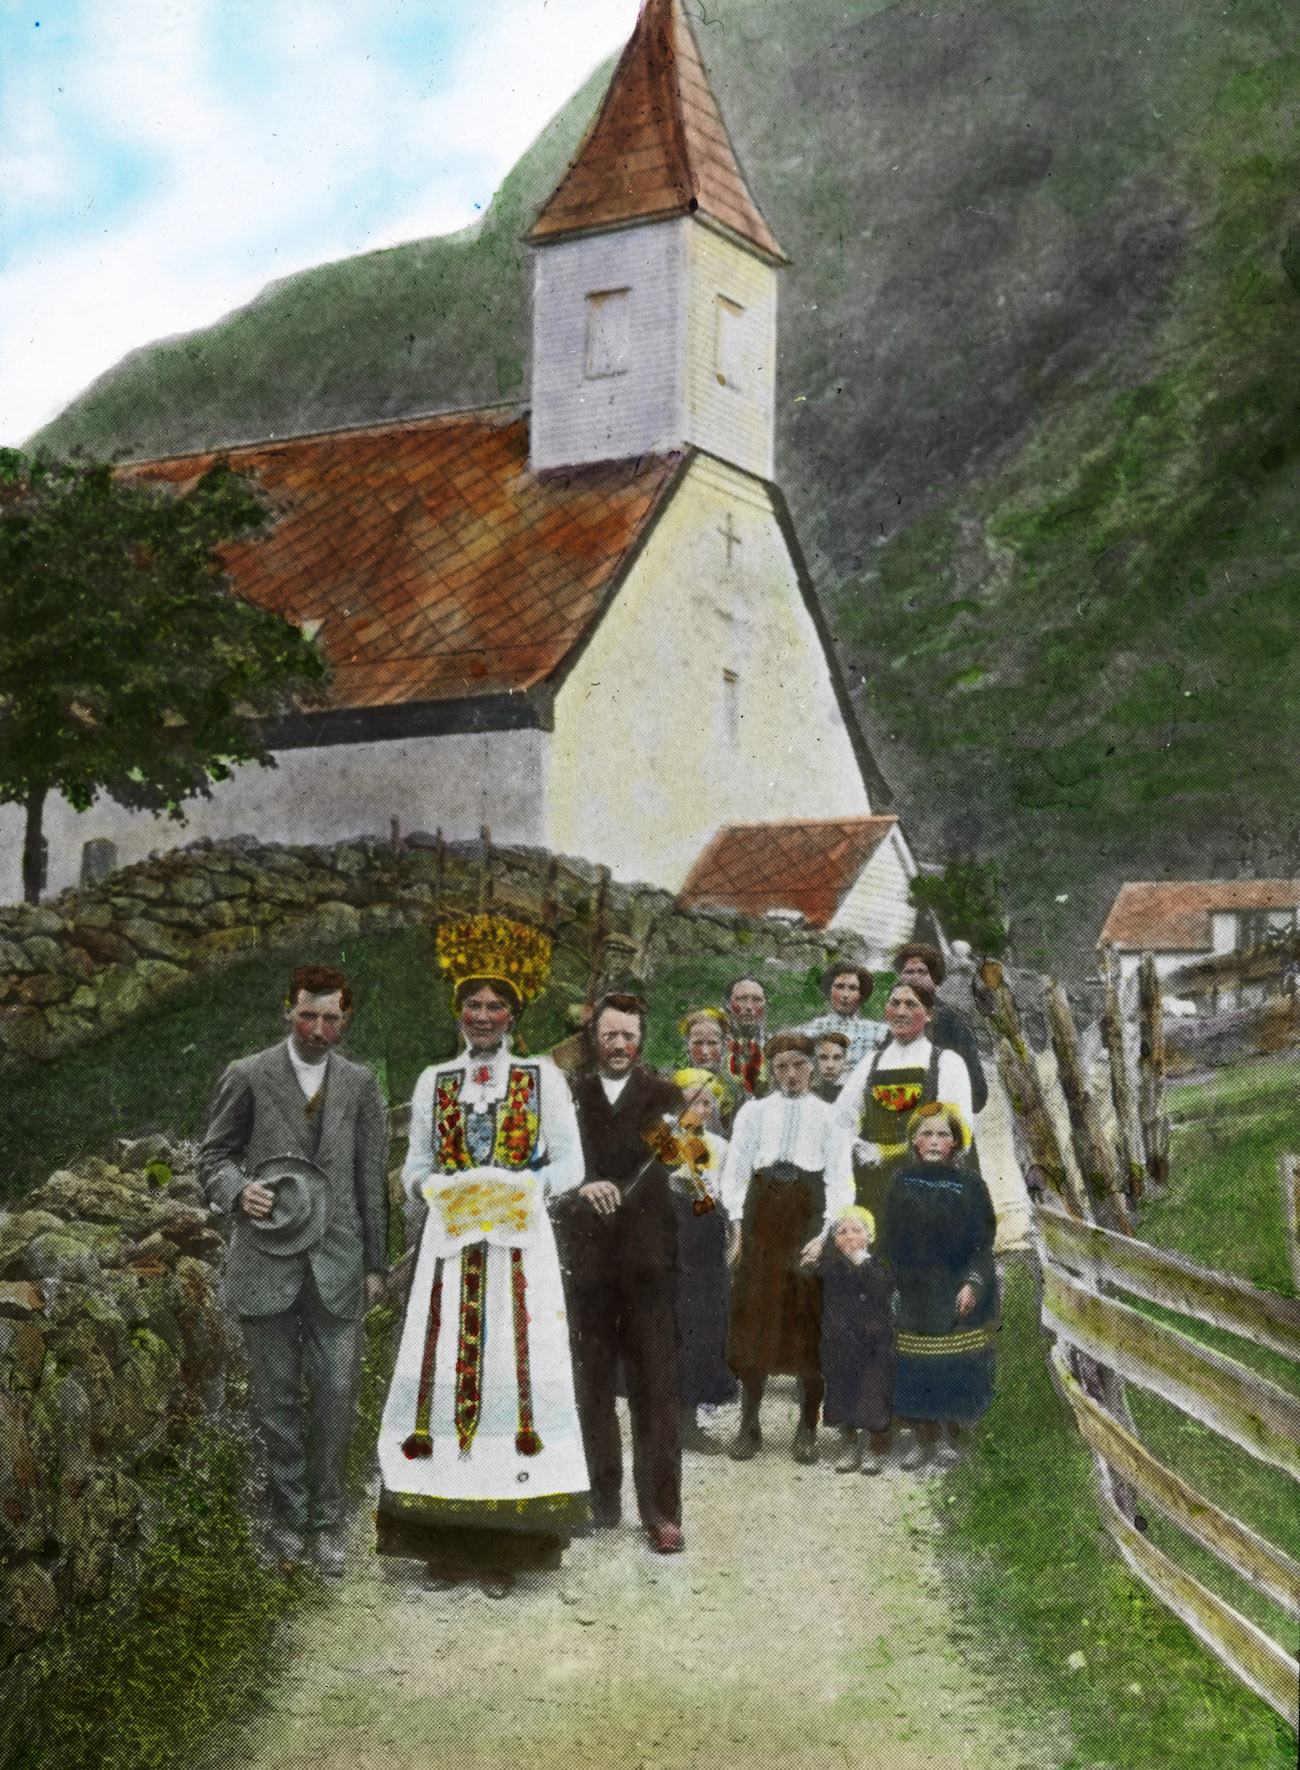 Lantern slides 19th century - the fjords of Norway